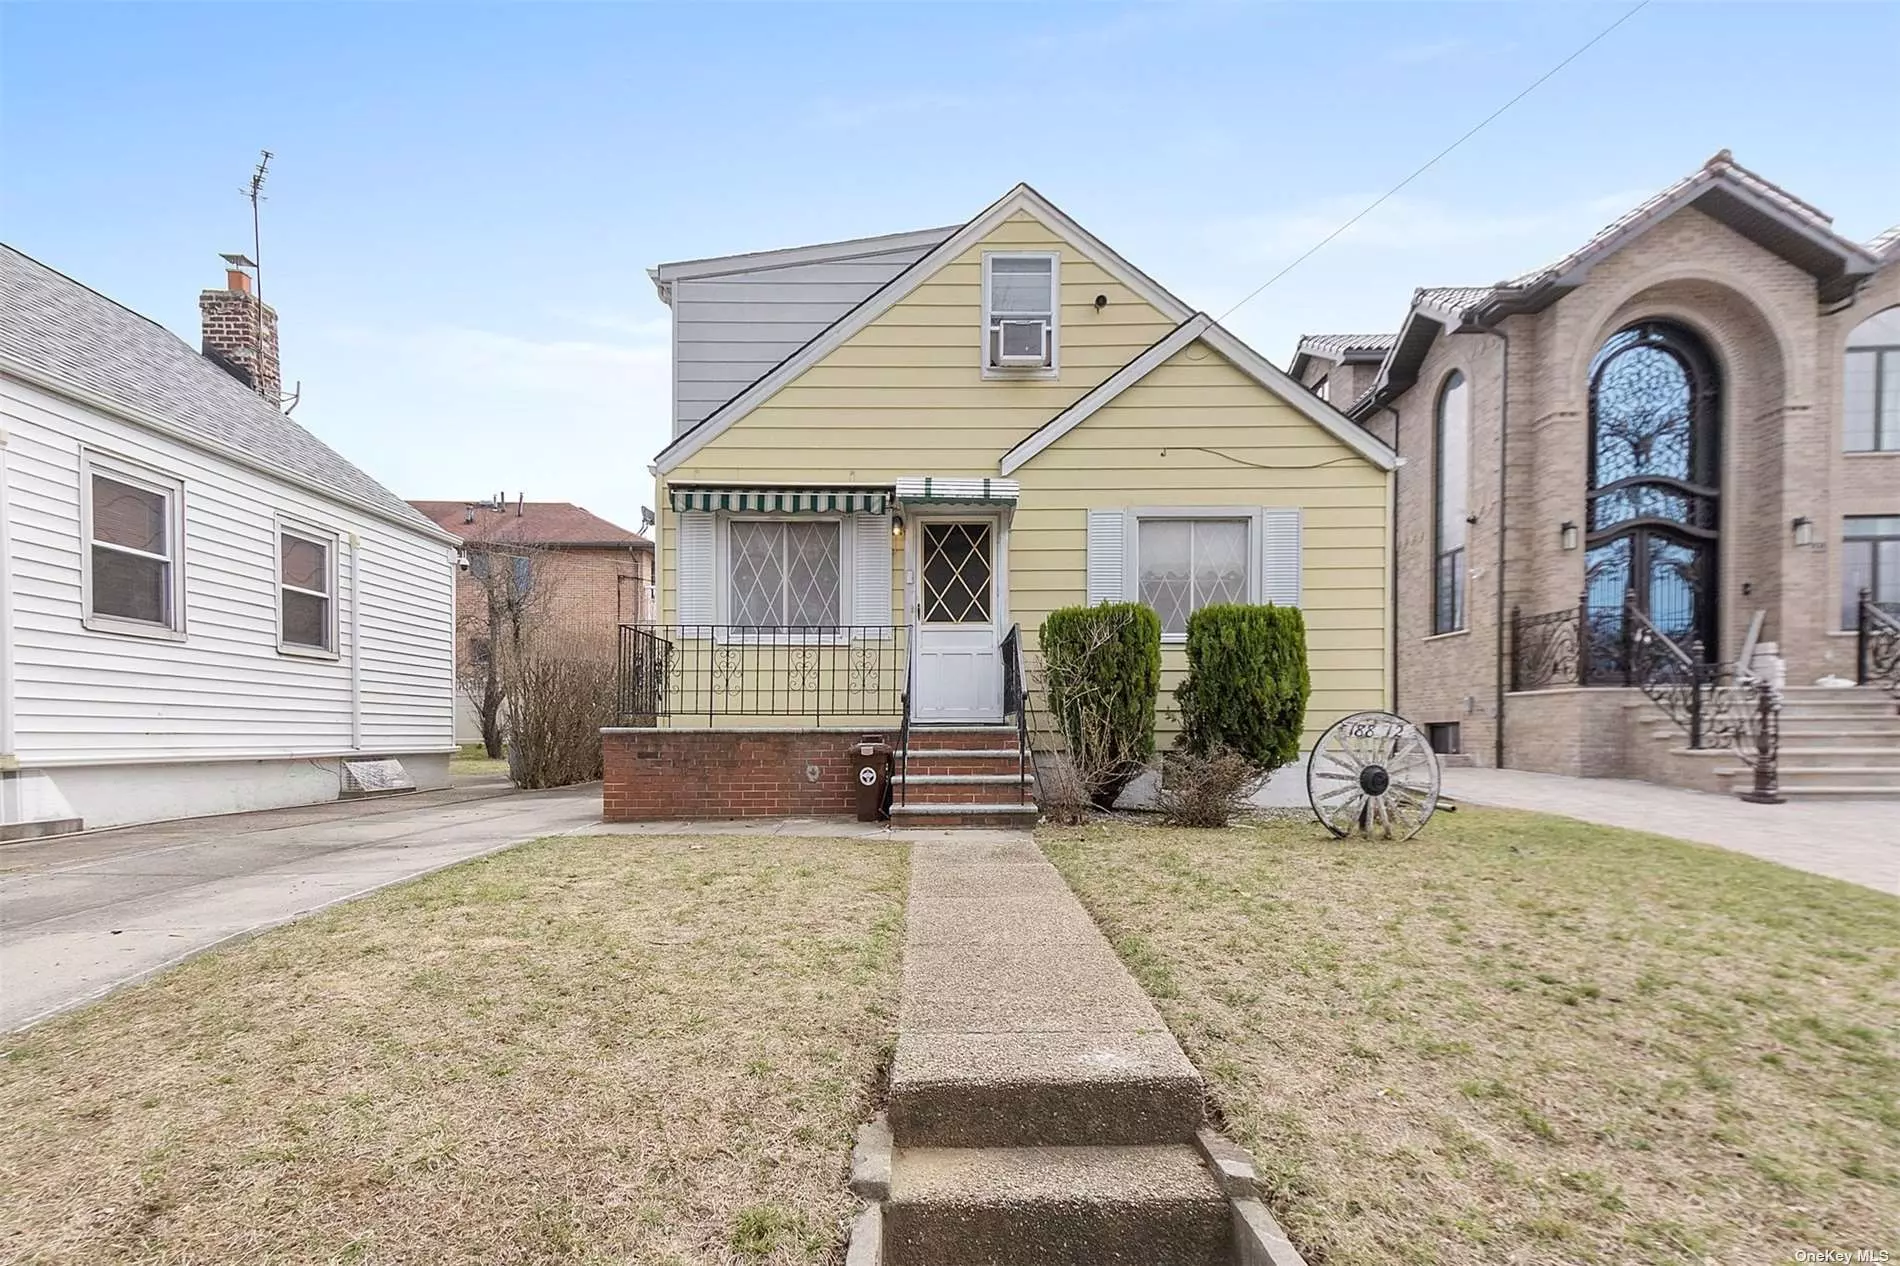 Just arrived- detached brick cape-styled home with 4 bedrooms, 2 full baths and full-size basement and 1 car detached parking. Great opportunity to knock down and rebuild. Super close to beautiful Peck Park. School district Queens 26. priced to sell- won&rsquo;t last!